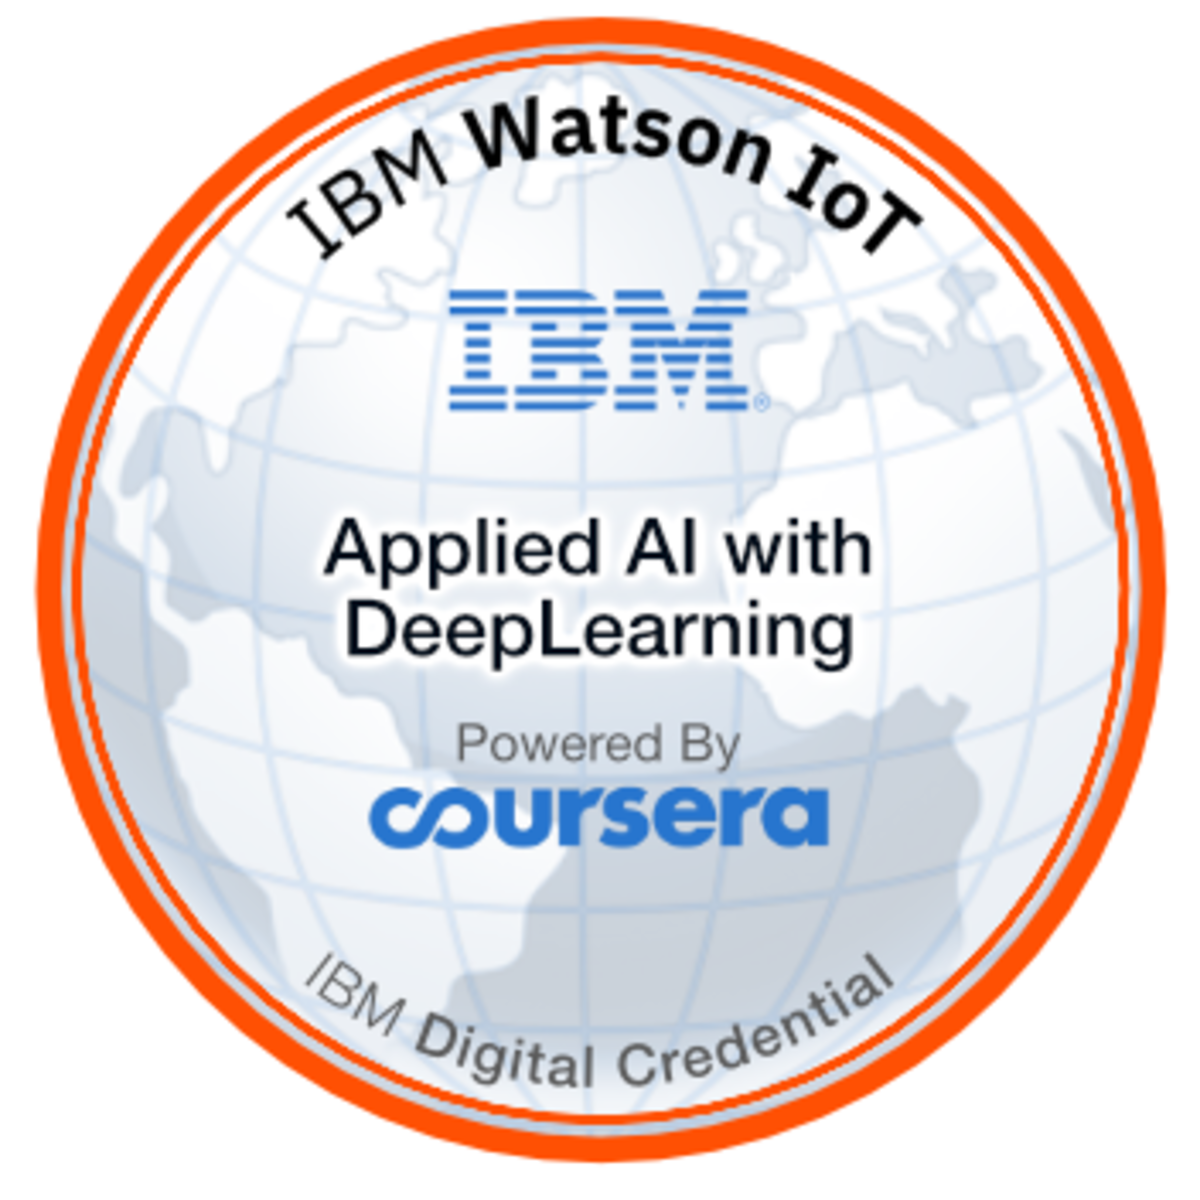 coursera deep learning course